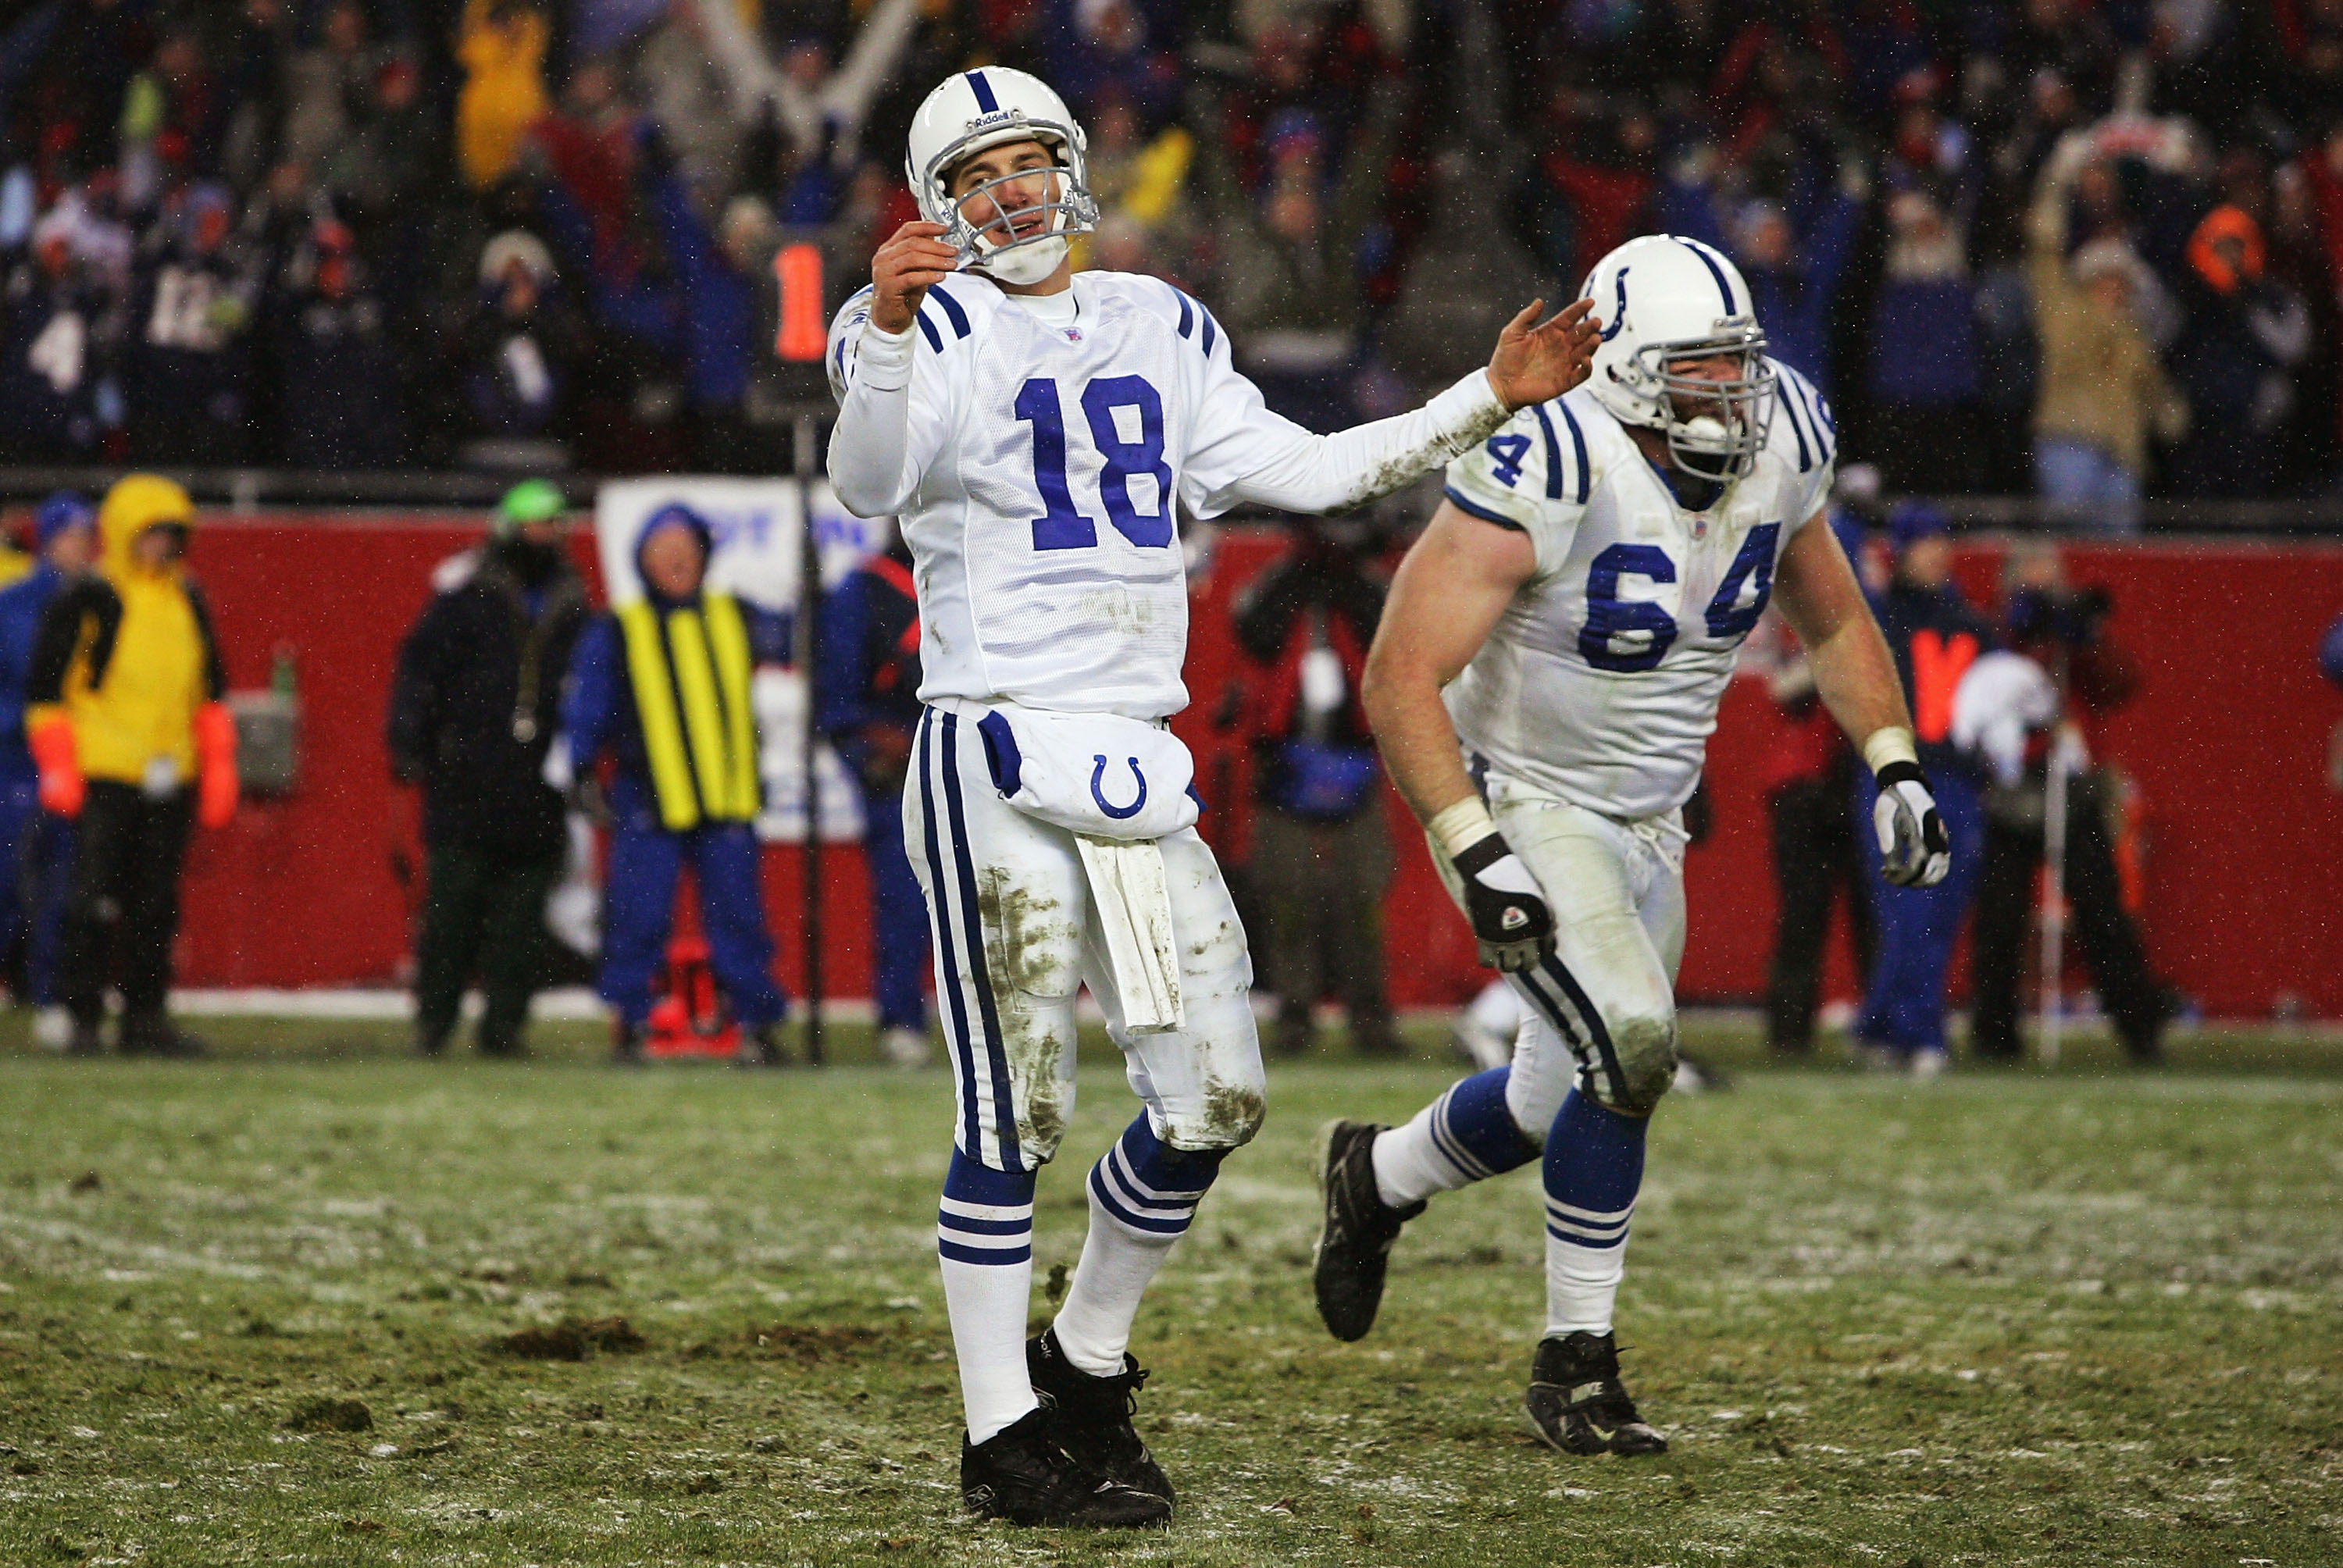 Peyton Manning of the Indianapolis Colts reacts after throwing an interception against the New England Patriots during the AFC divisional playoff game at Gillette Stadium on January 16, 2005 in Foxboro, Massachusetts. The Patriots defeated the Colts 20-3. (Photo by Harry How/Getty Images)